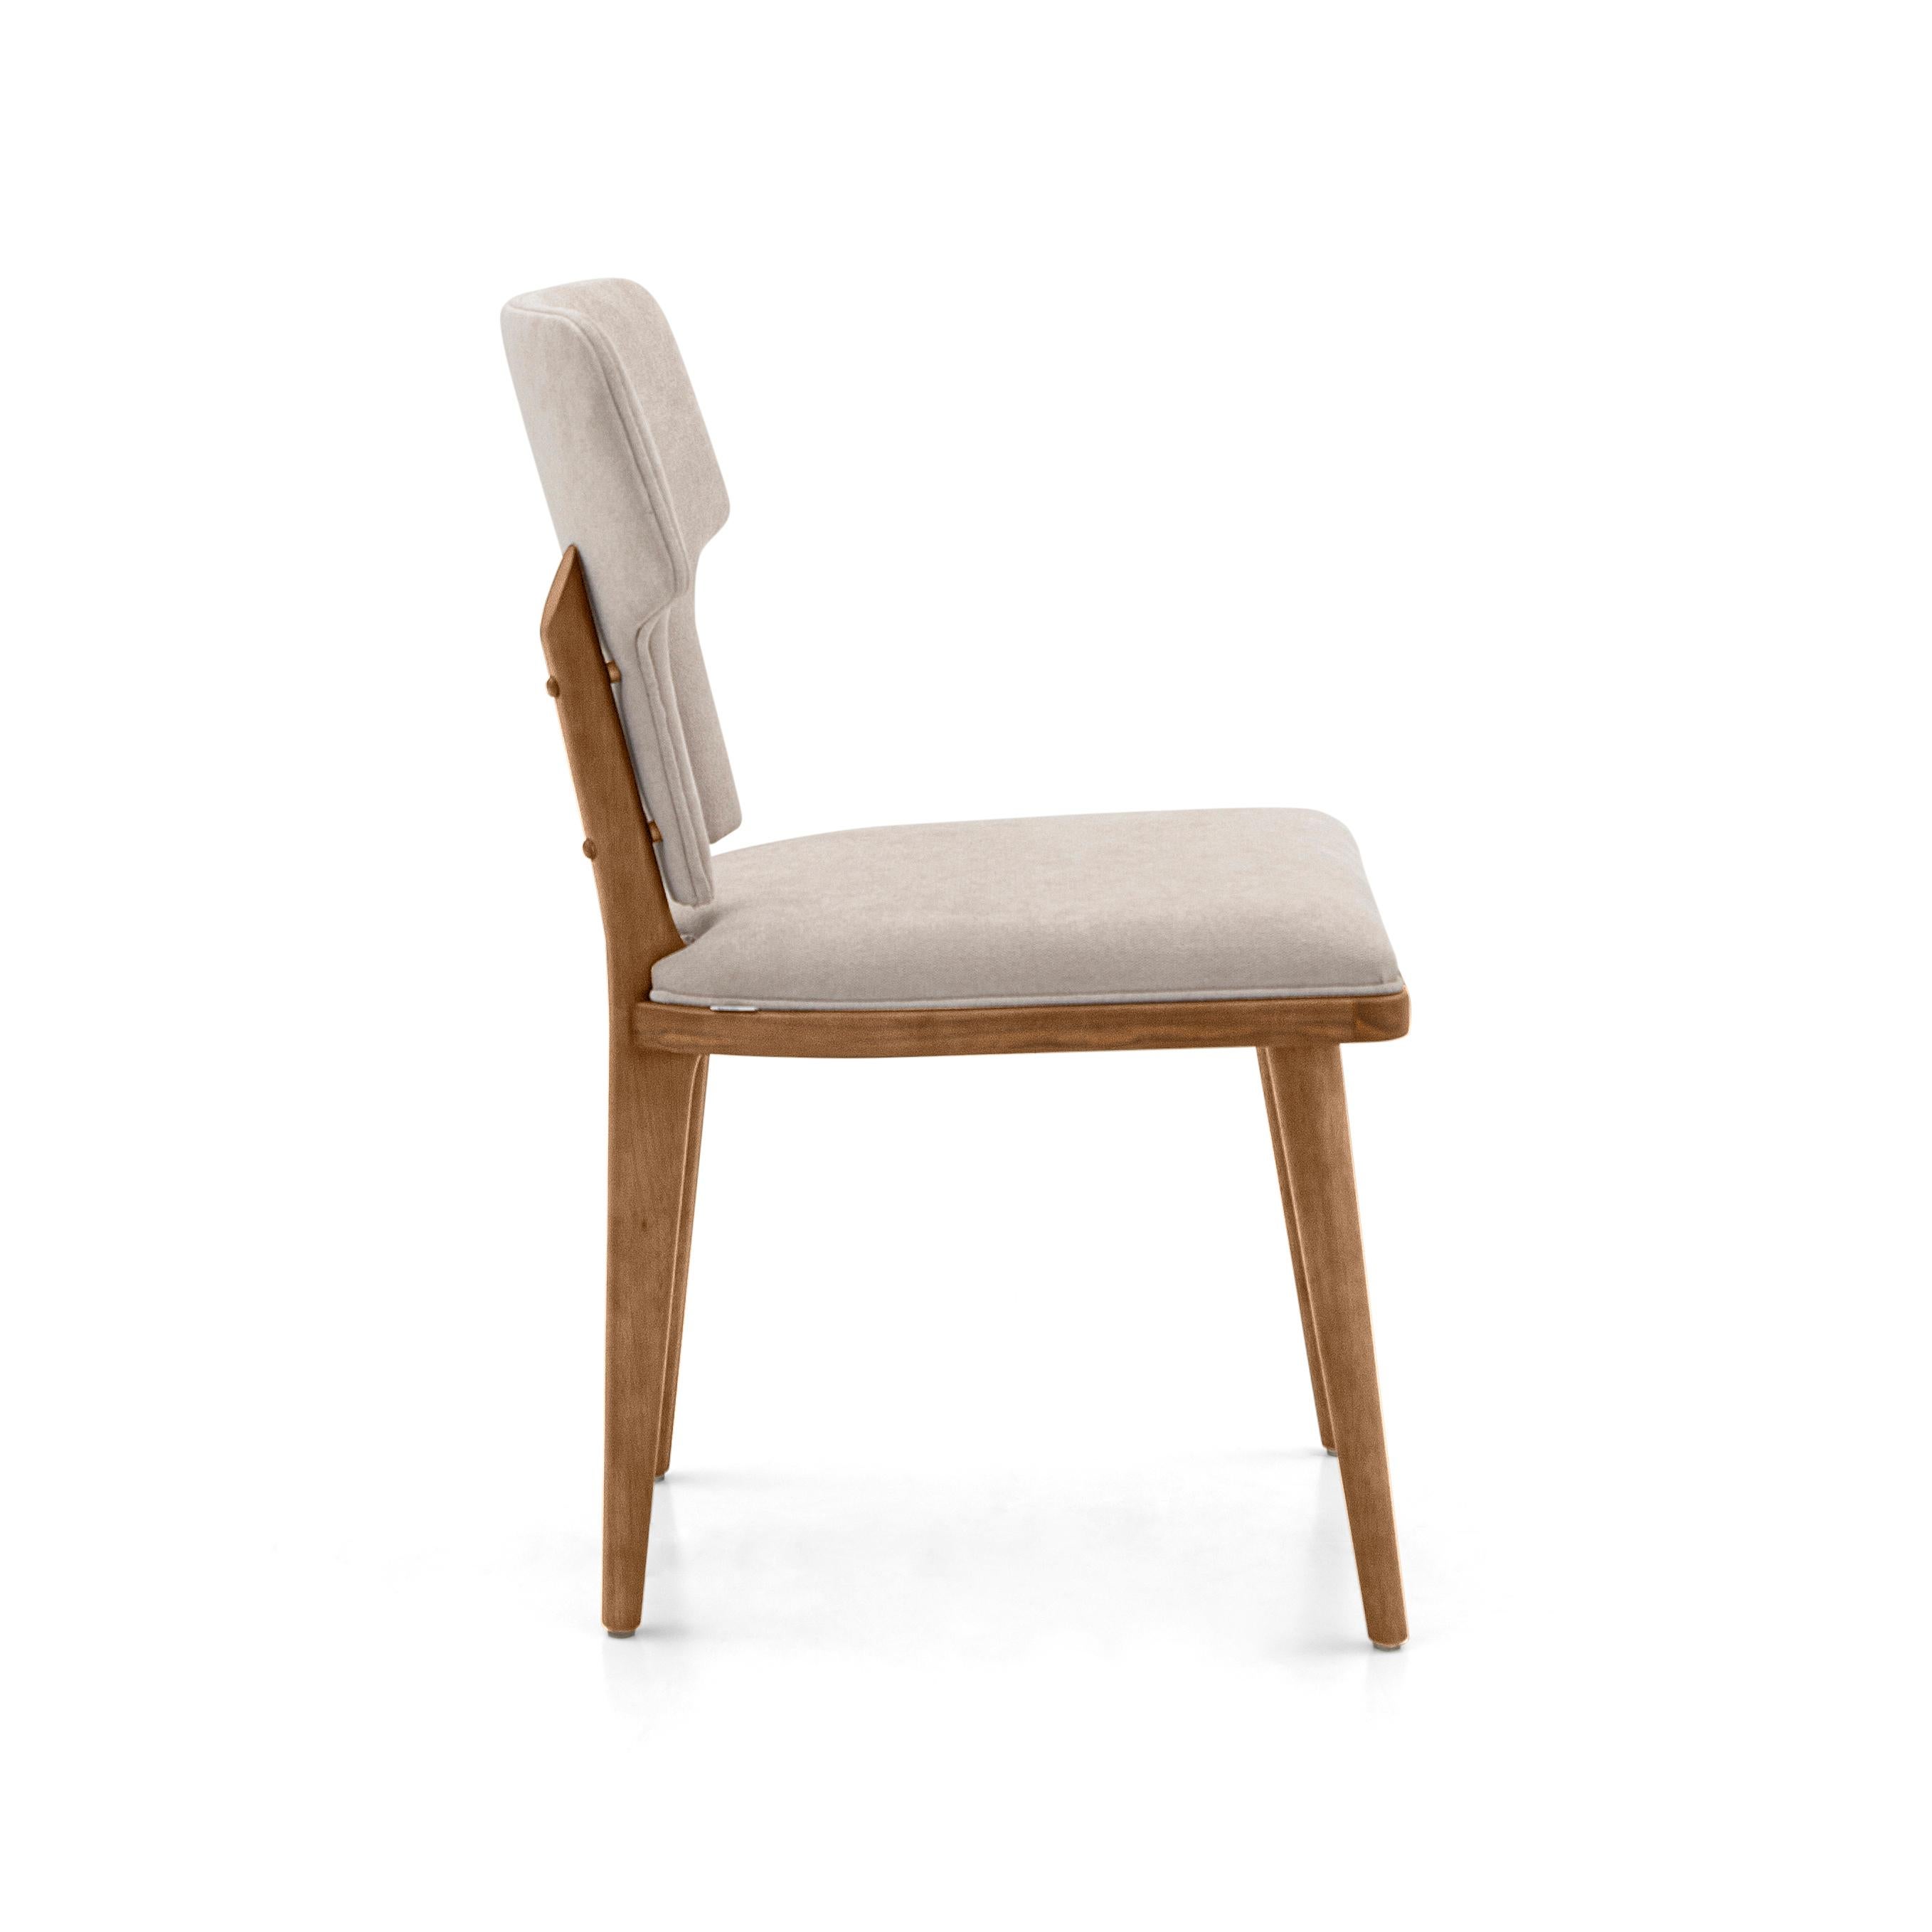 The Fork dining chair has been made by our Uultis team with a light beige fabric and a teak wood Uultis finish for the legs. Our amazing team at Uultis has thought of every little detail so this dining chair is perfect and comfortable as well as